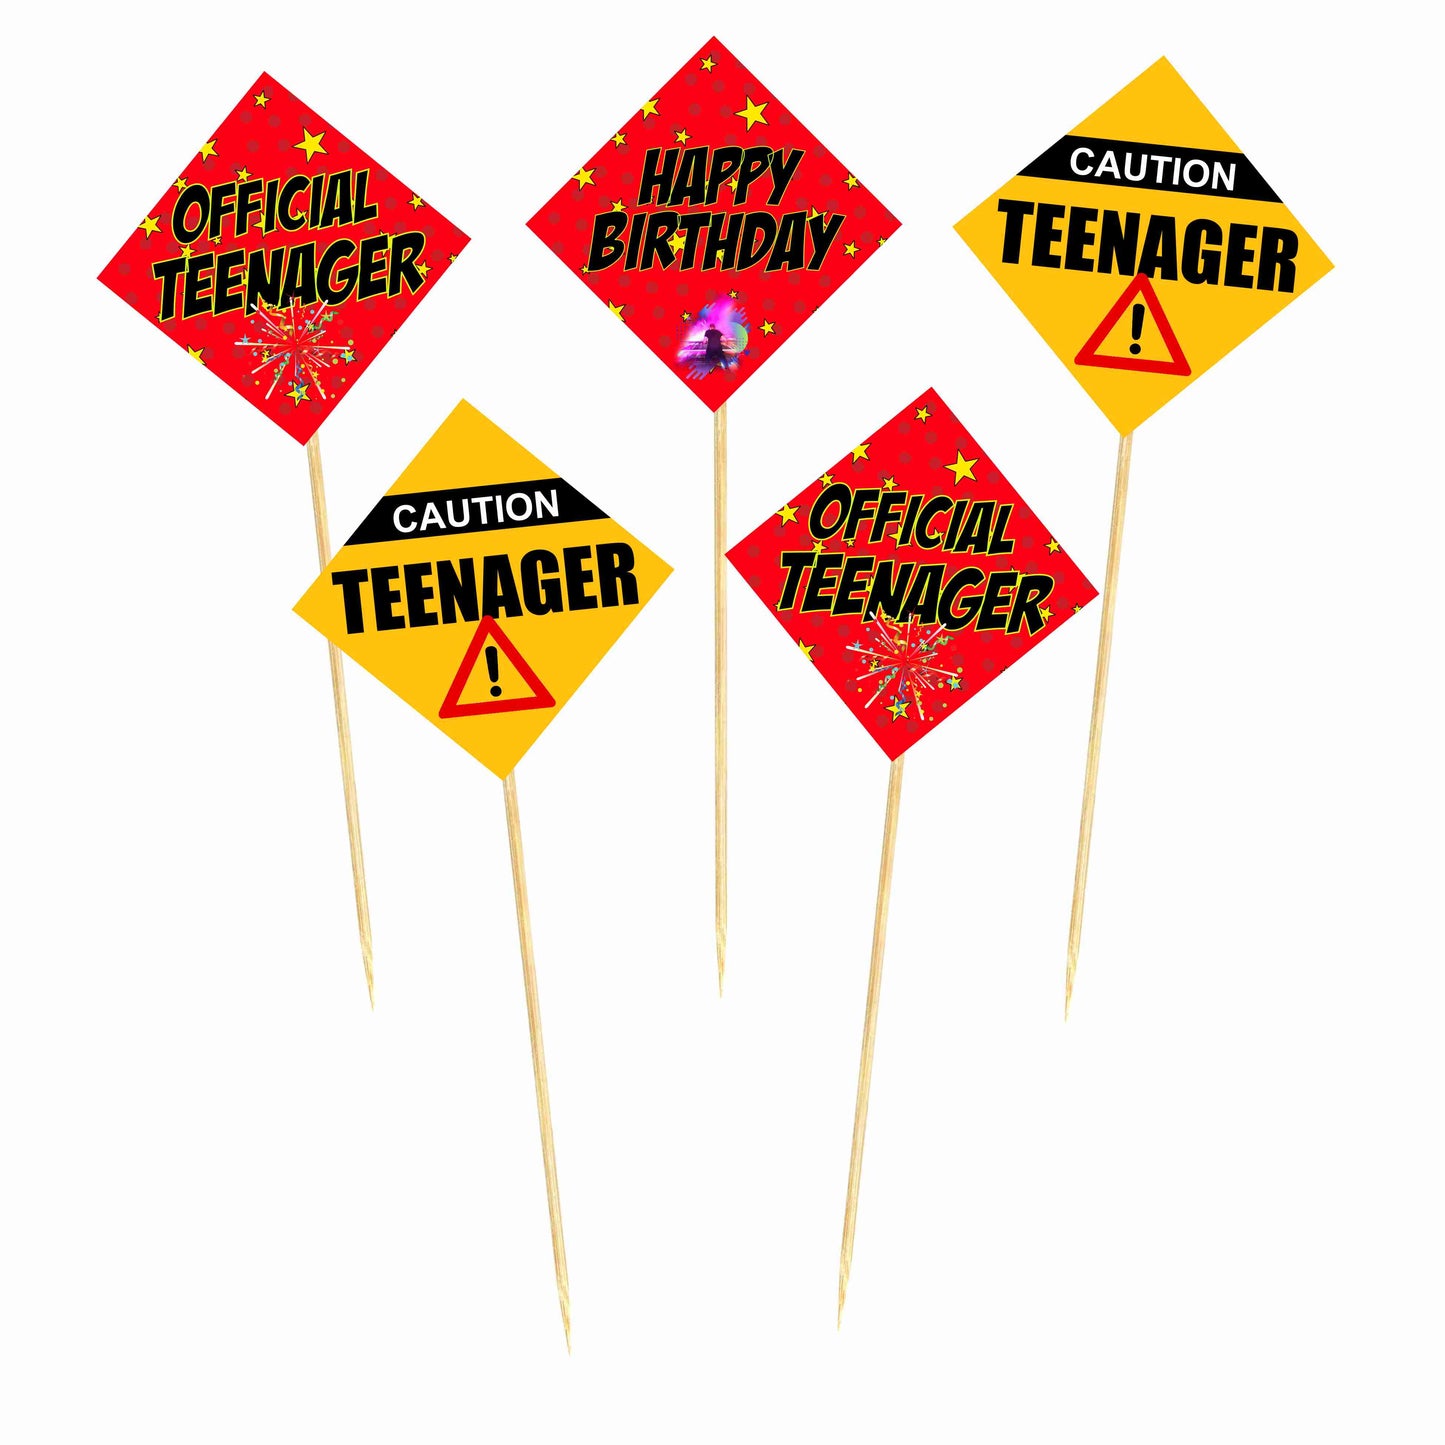 Official Teenager Theme Cake Topper Pack of 10 Nos for Birthday Cake Decoration Theme Party Item For Boys Girls Adults Birthday Theme Decor